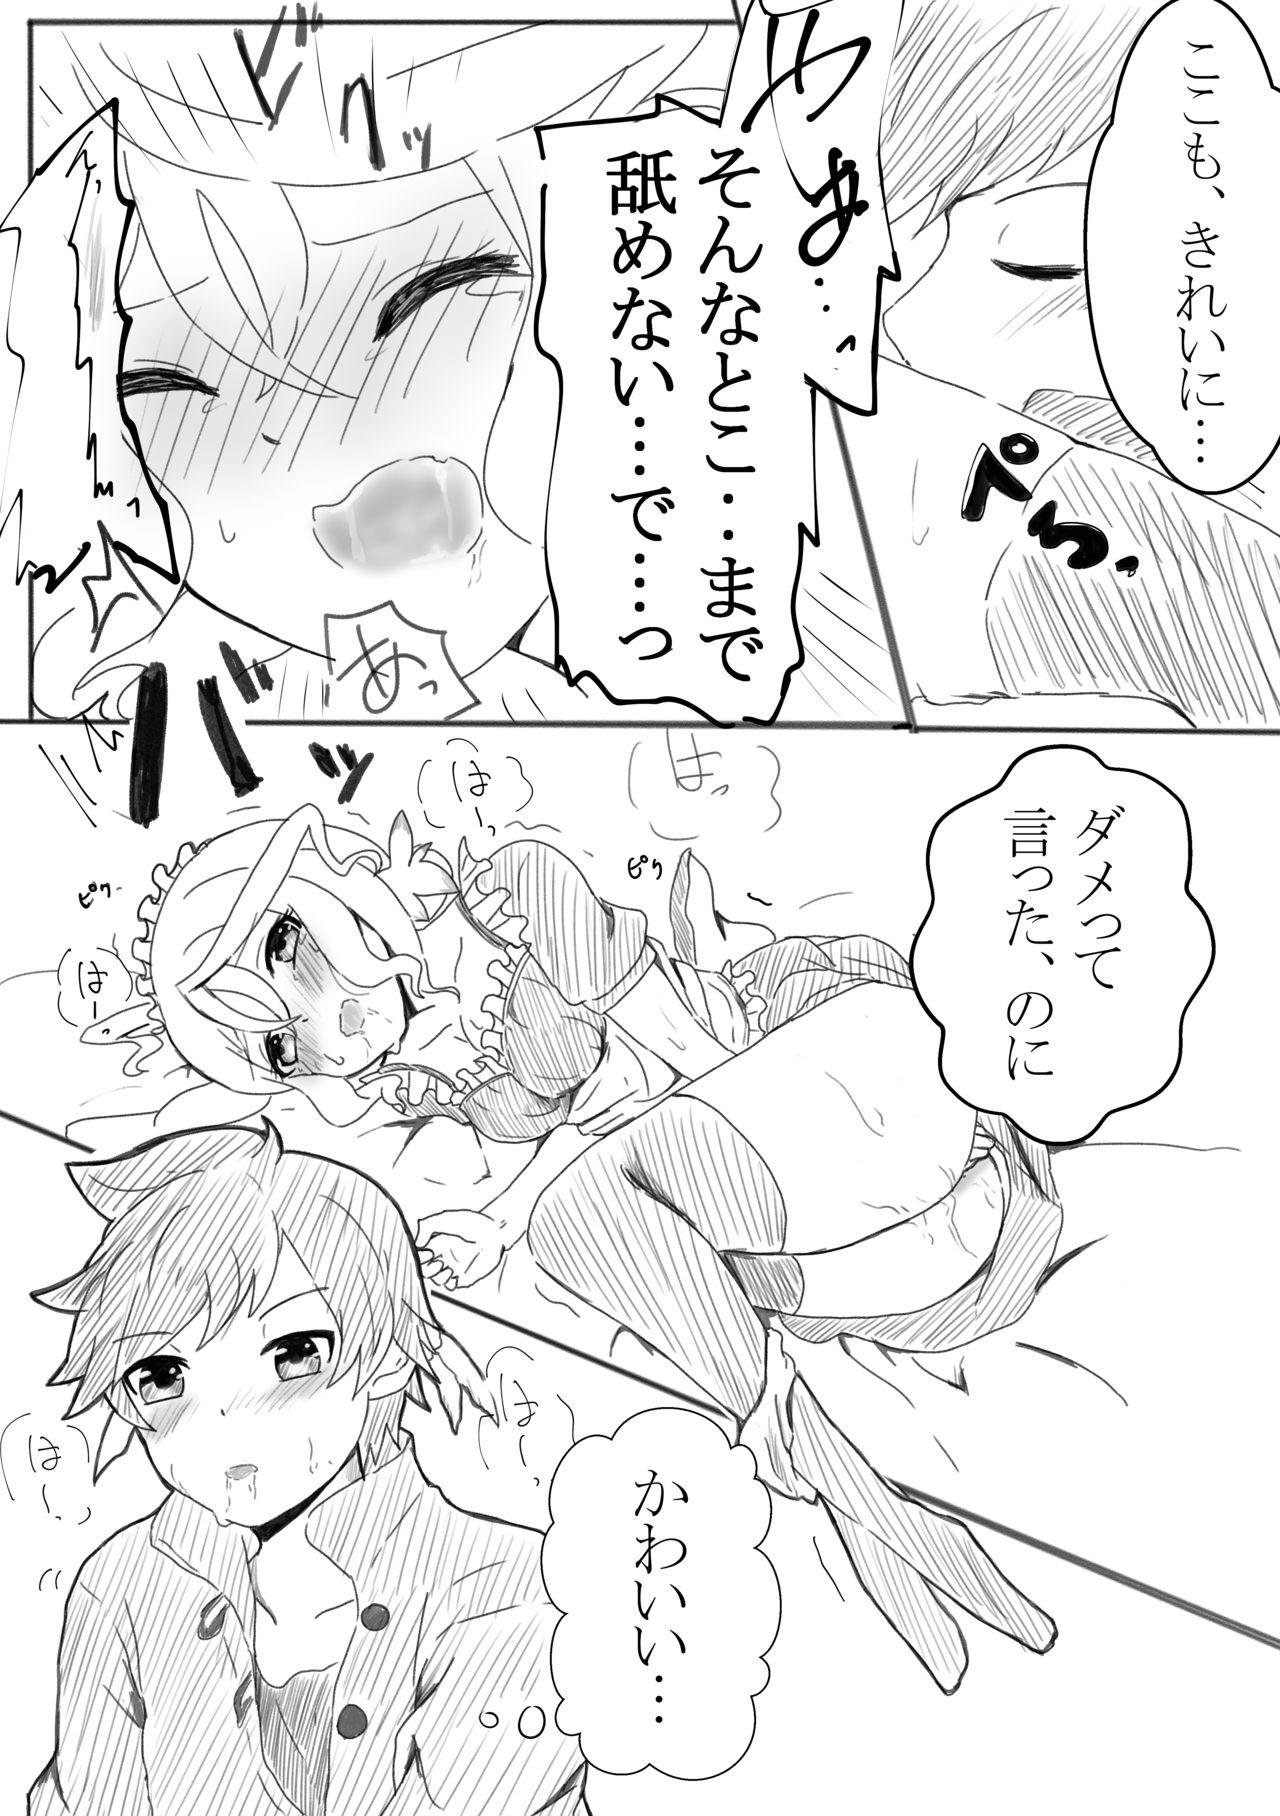 Skinny アリーシャで癒して？ - Tales of zestiria Pantyhose - Page 9